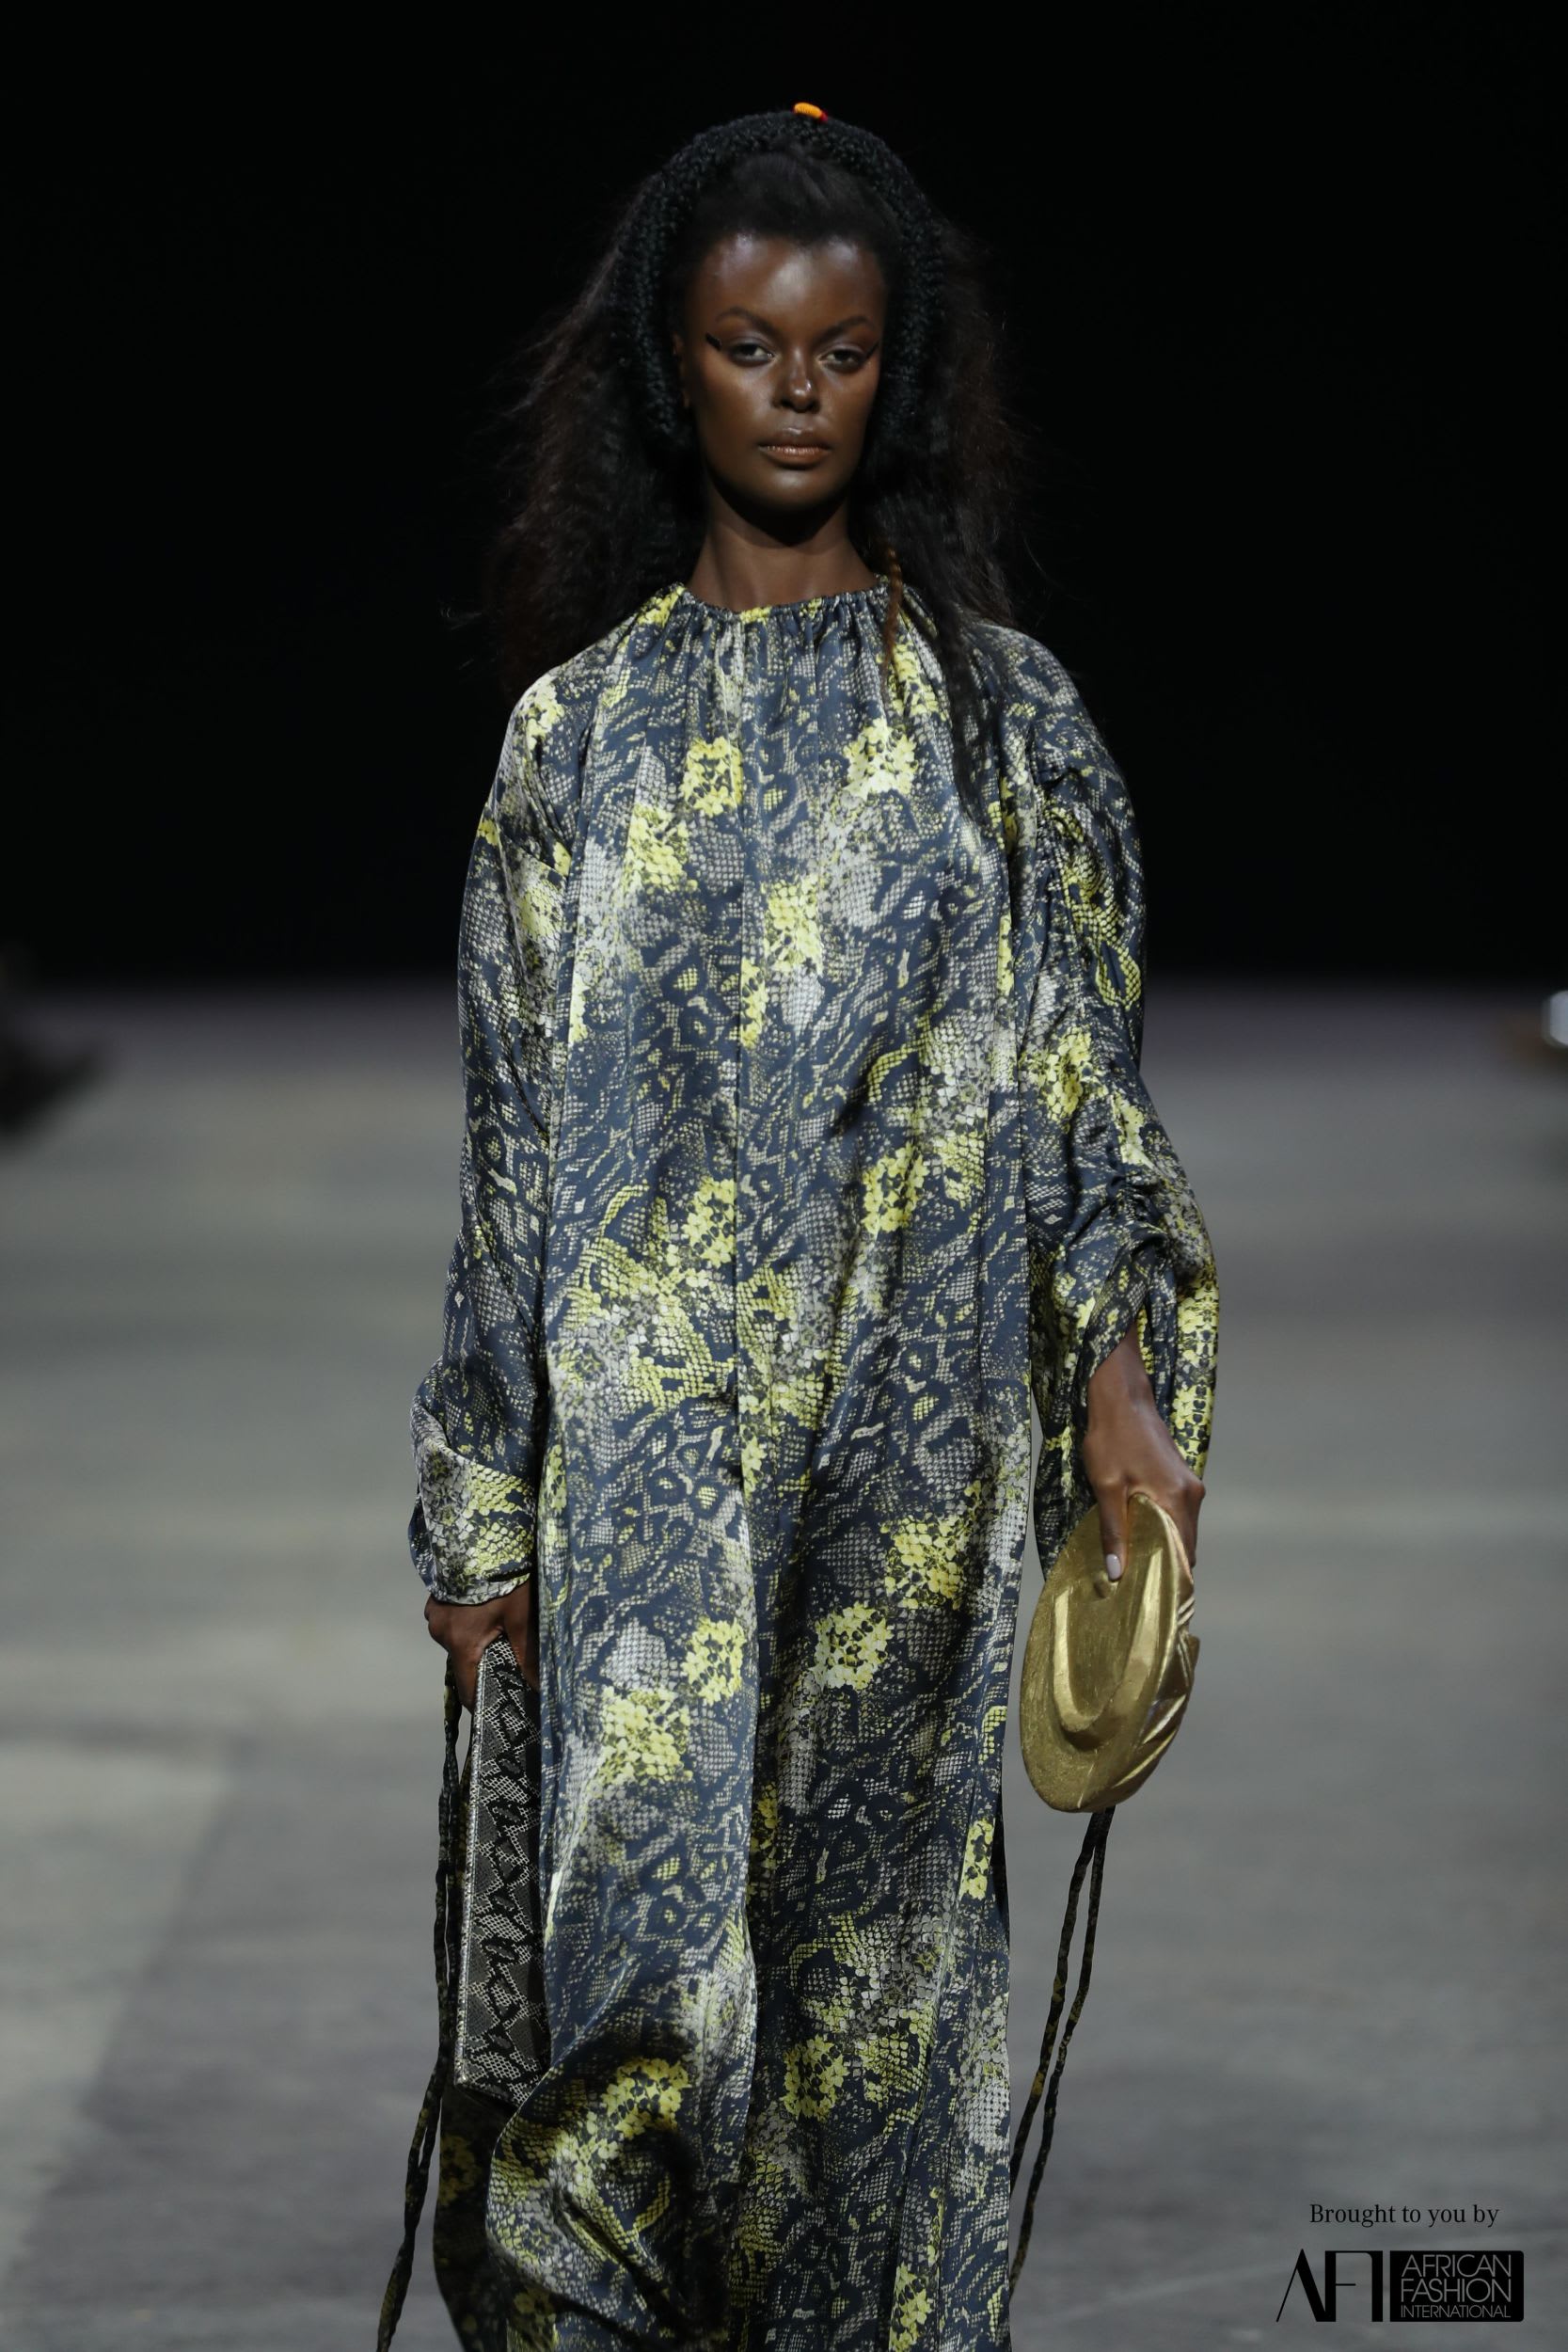 #AFICTFW18 | Tongoro by Sarah Diouf | BN Style